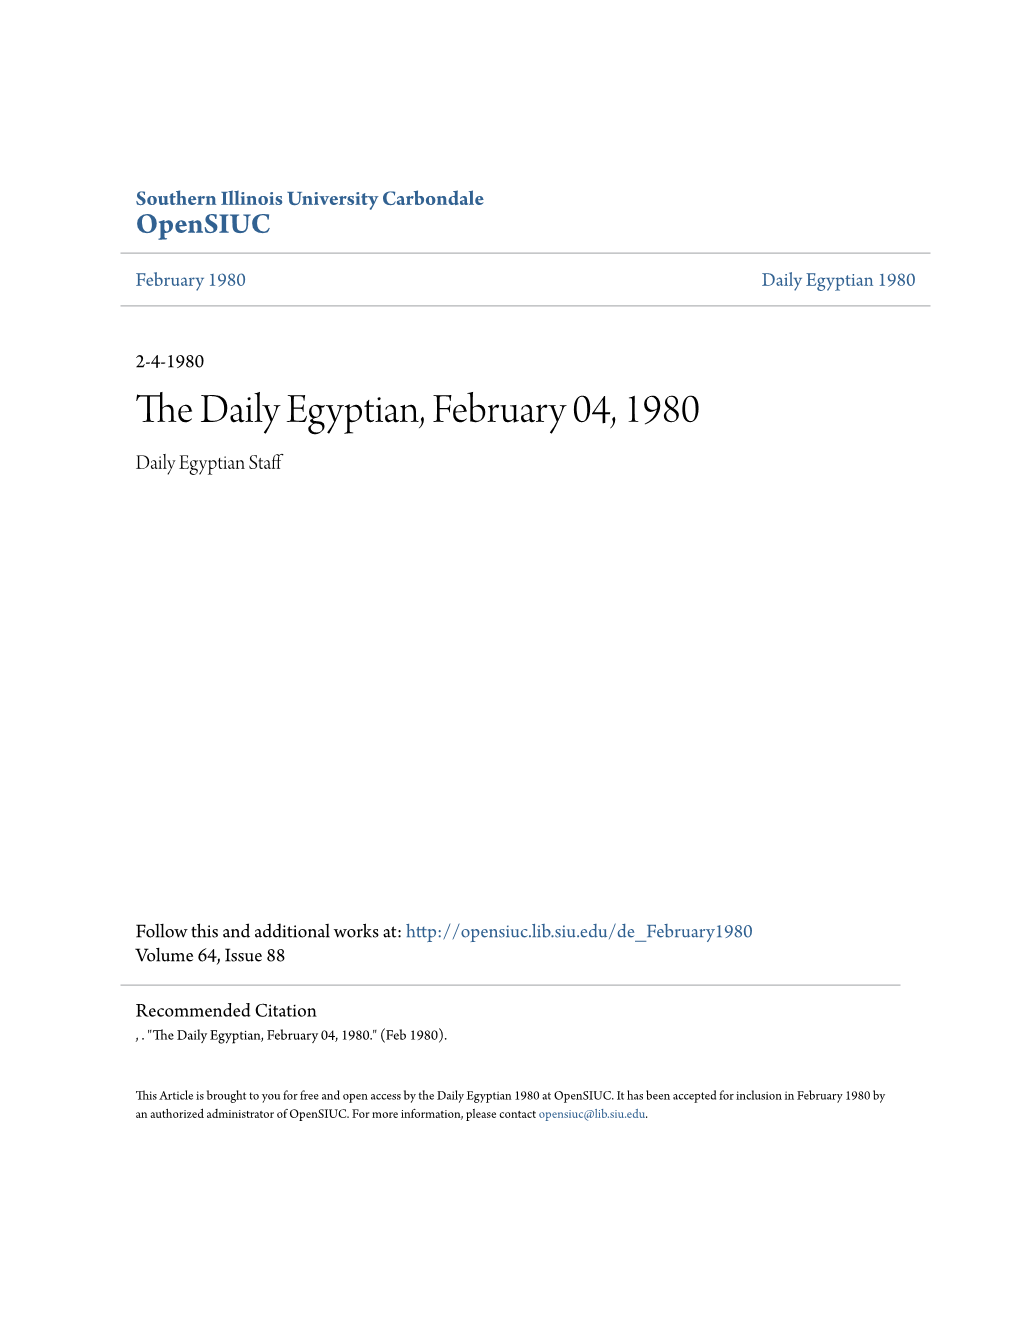 The Daily Egyptian, February 04, 1980